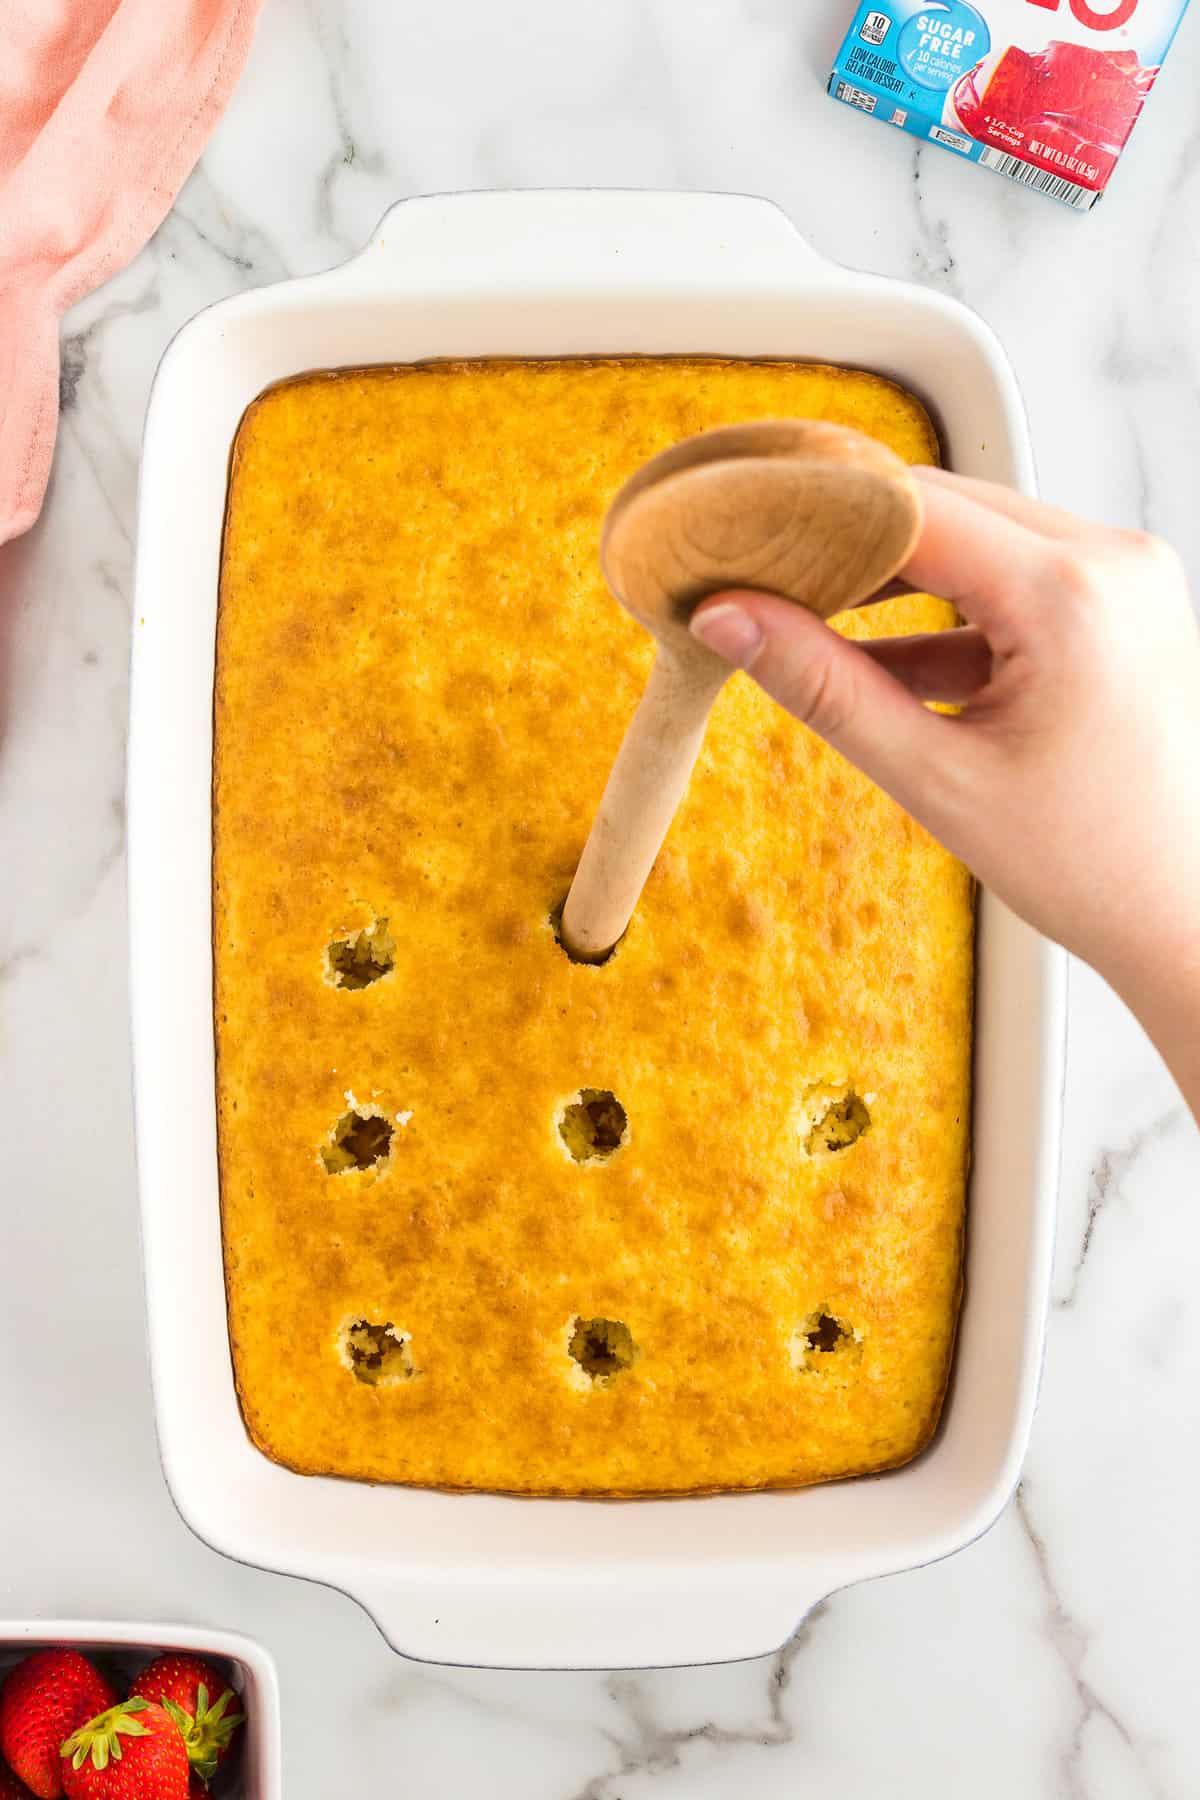 Poke holes in poke cake with spoon handle